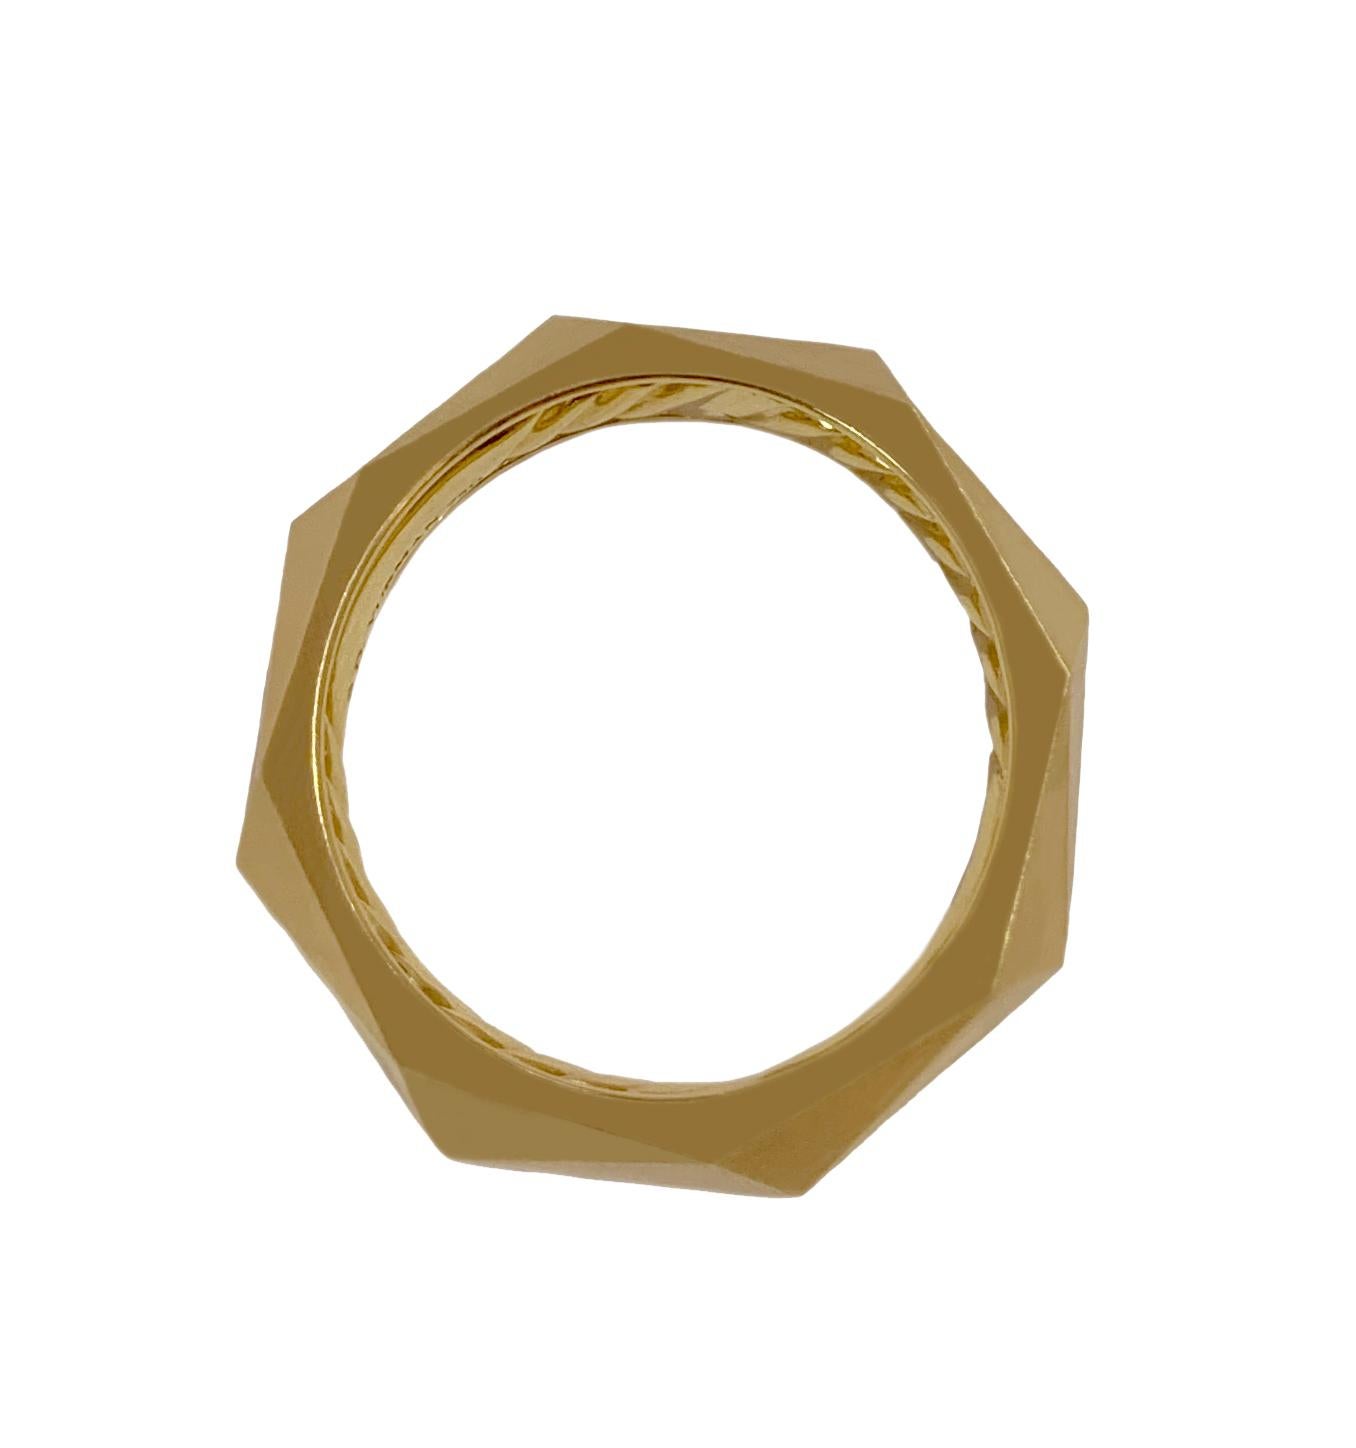 torqued faceted band ring